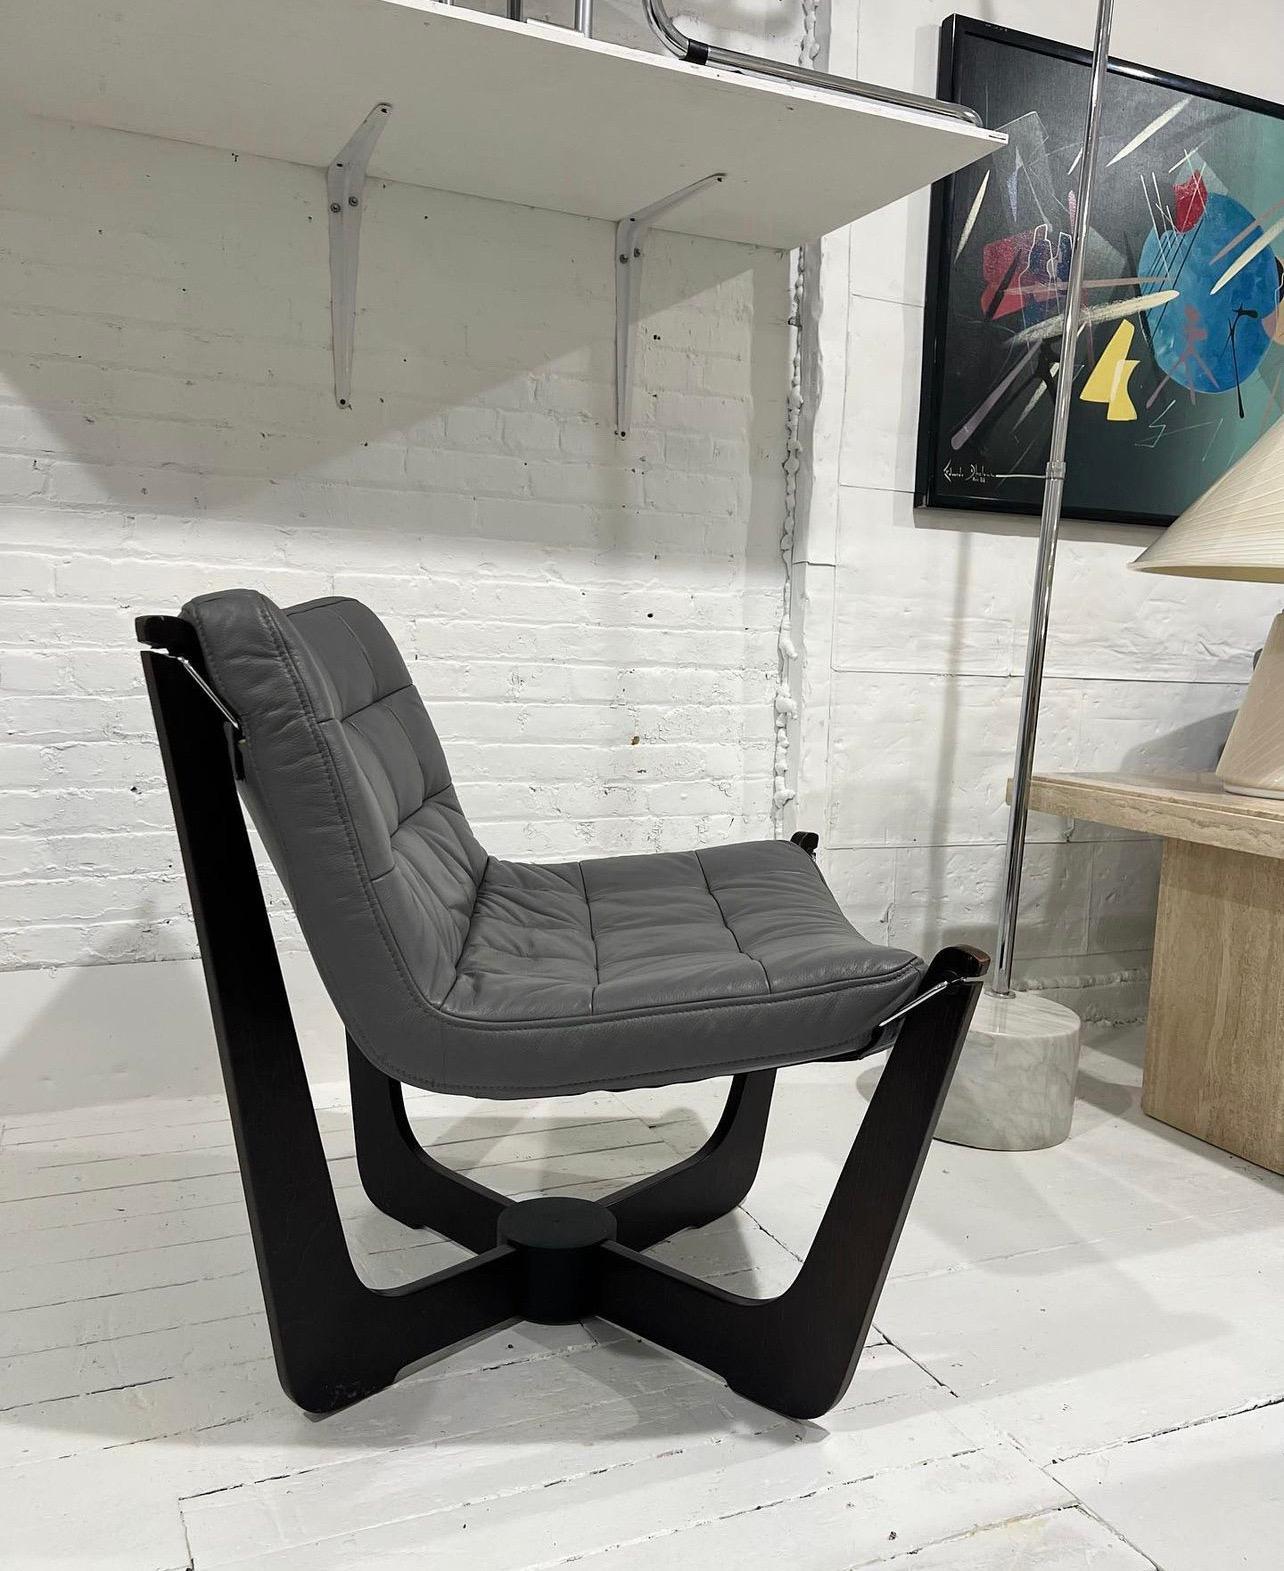 An incredibly comfortable, stylish & rare lounge chair! Genuine leather seat can easily be removed from the walnut frame and reattached when needed for transportation. The leather can also be removed for cleaning and reupholstery! Chair is in